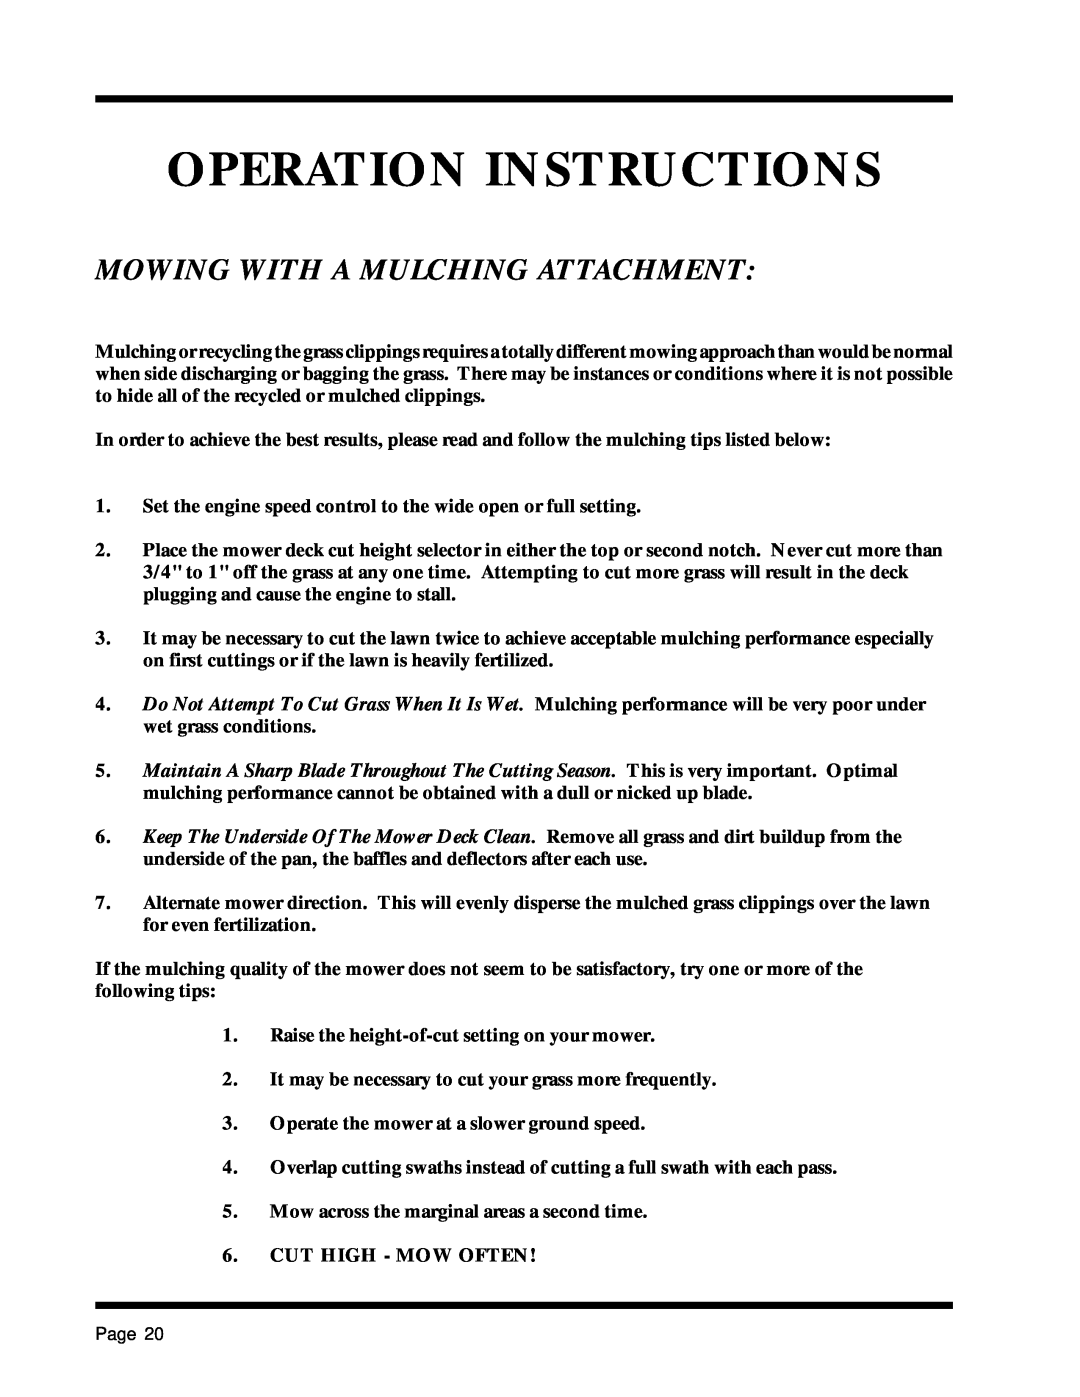 Dixon 1857-0599 manual Mowing With A Mulching Attachment, Operation Instructions 